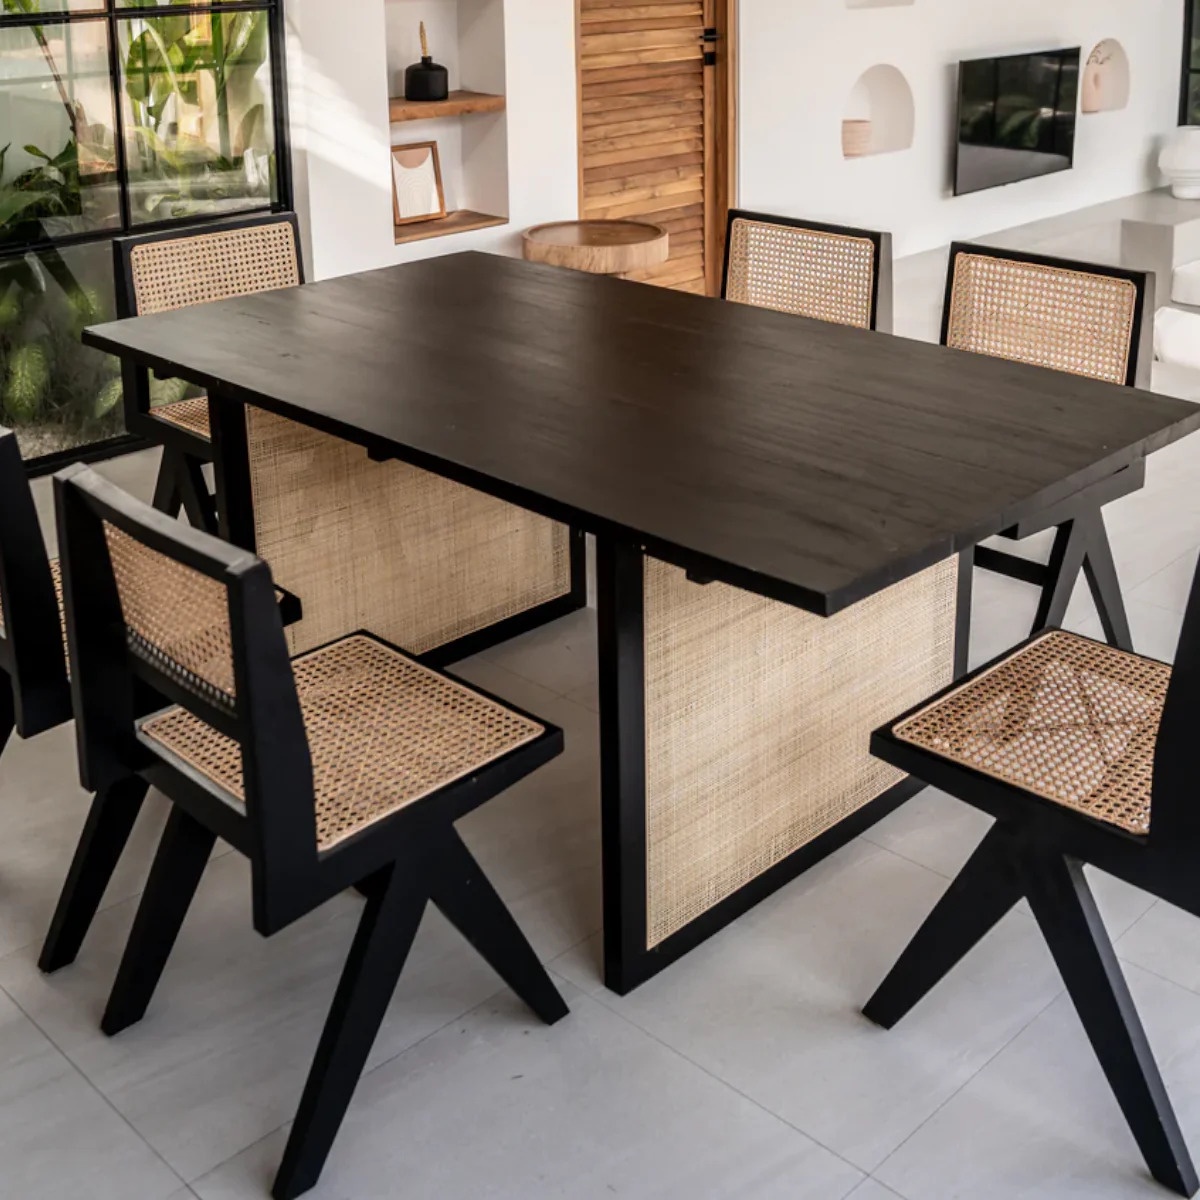 Elevate Your Dining Experience with the DERICA 6 SEATER RATTAN DINING TABLE from Nismaaya Decor